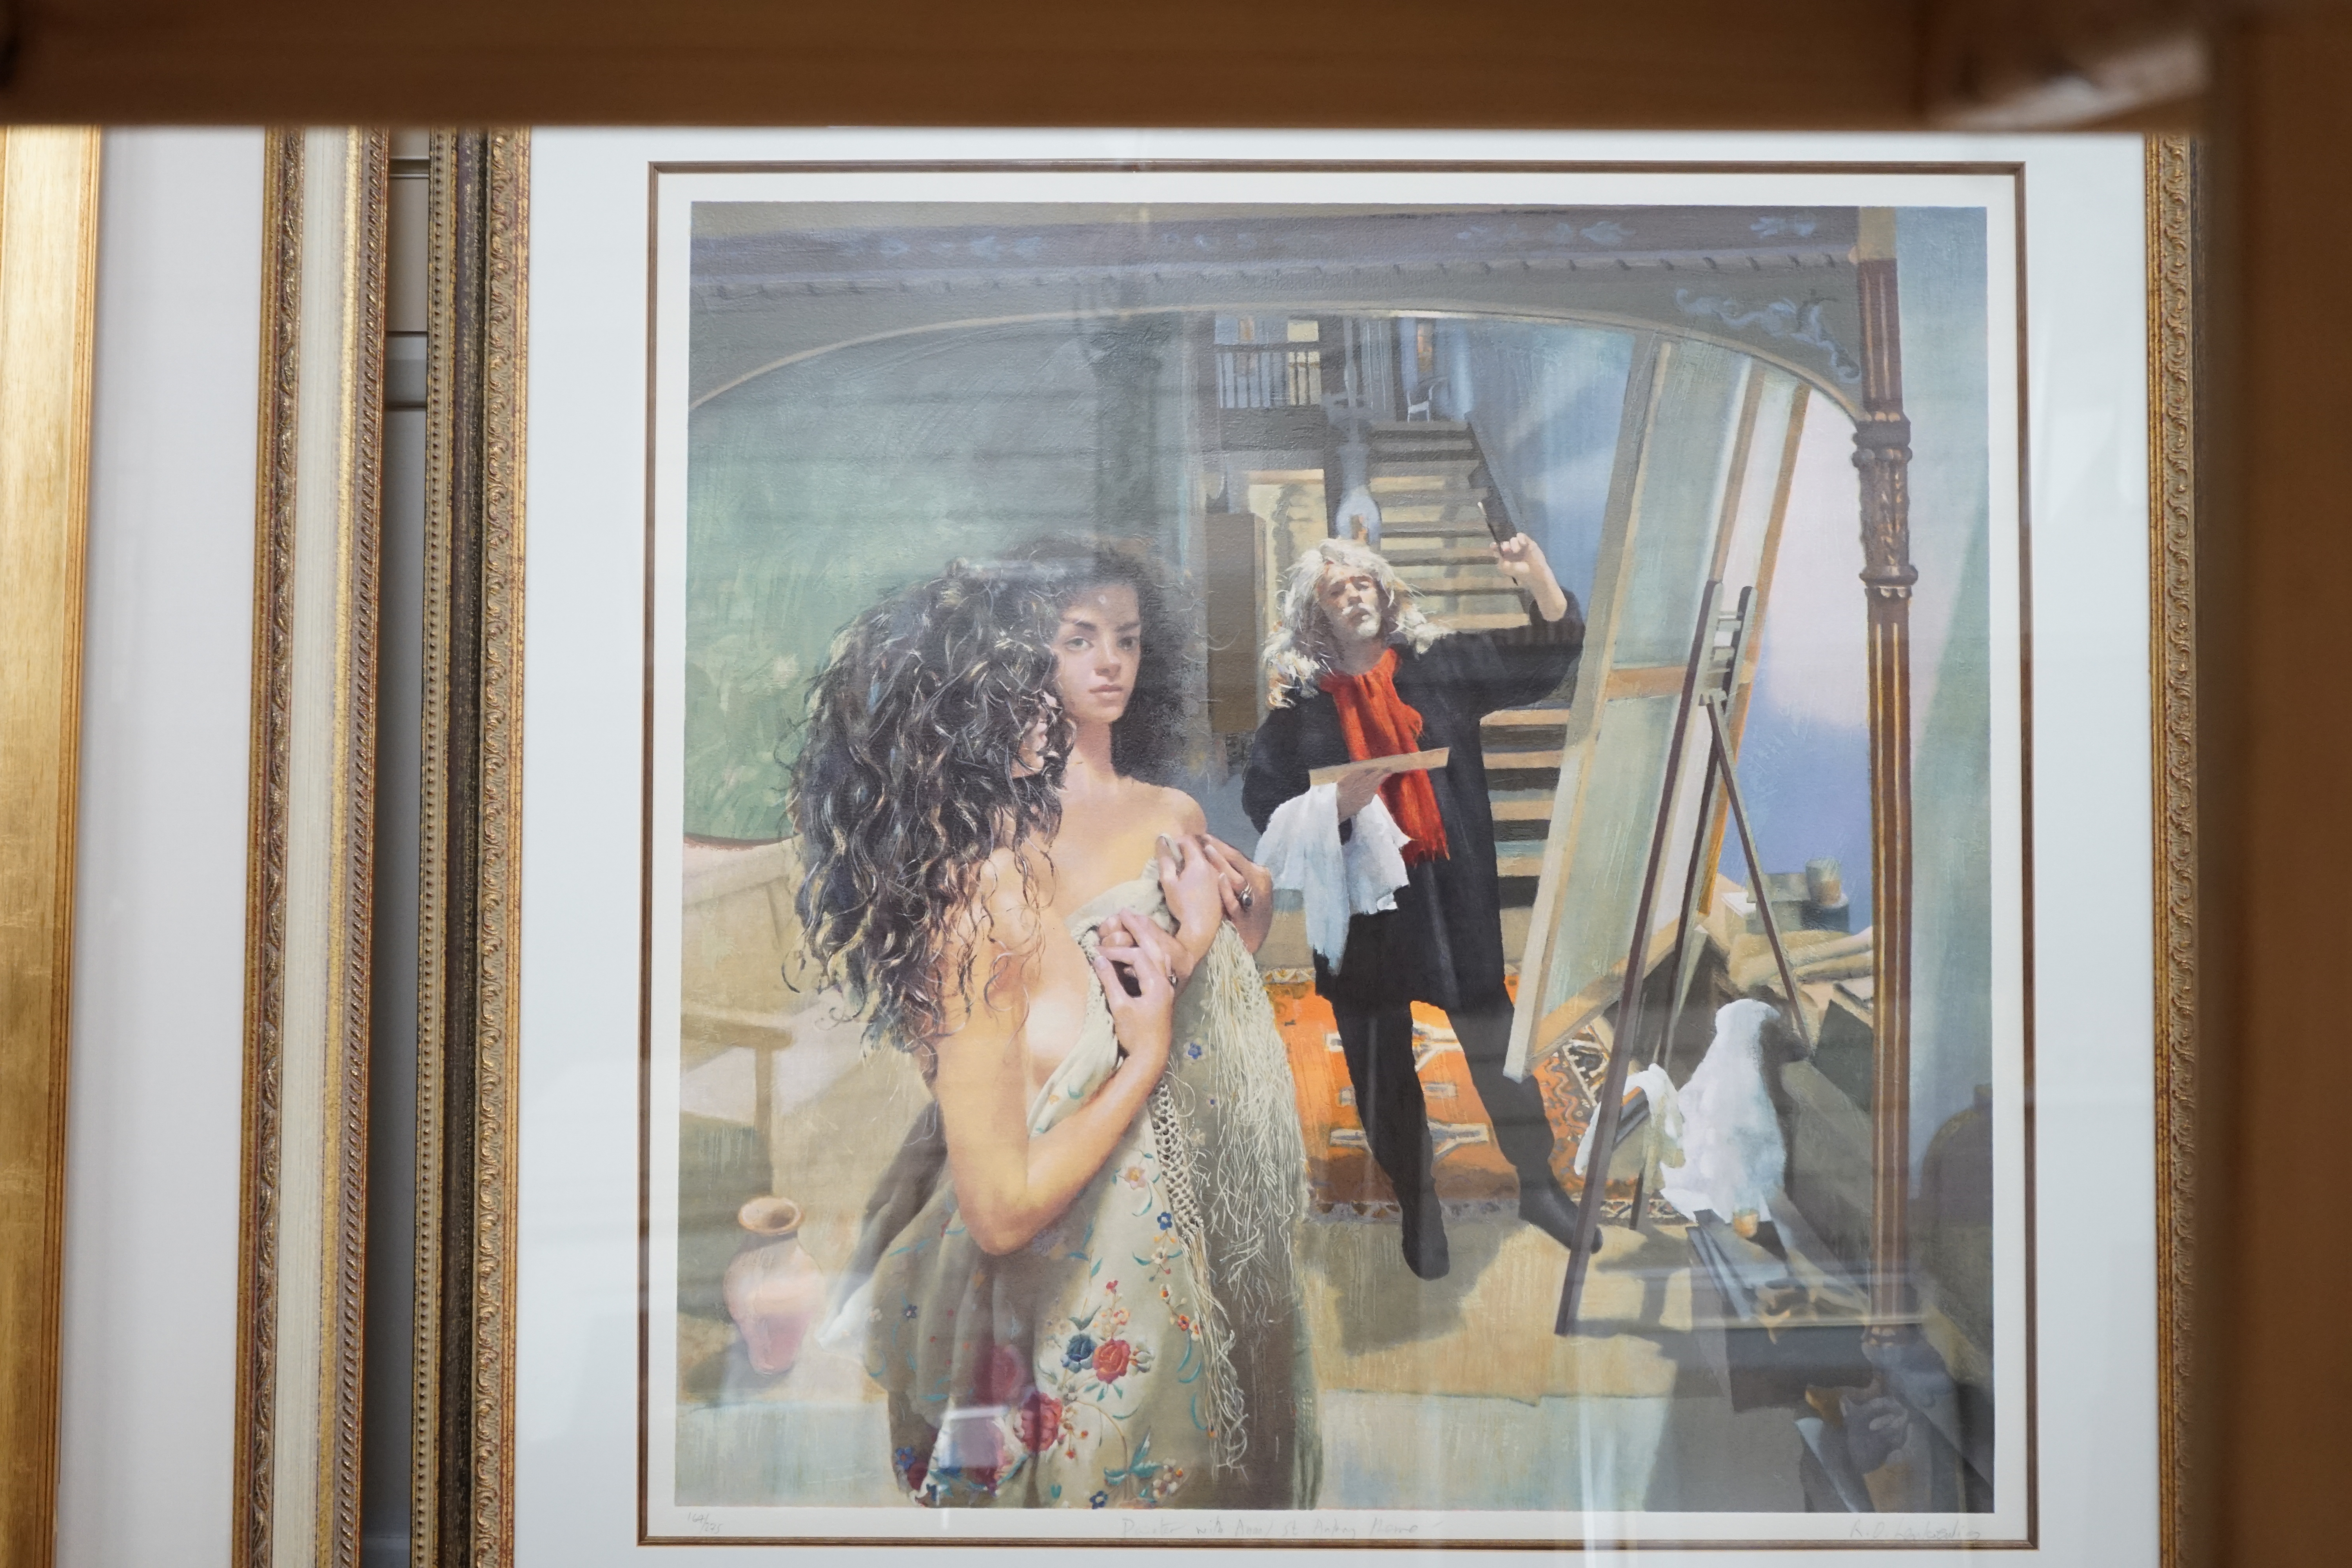 Robert Lenkiewicz (1941-2002), offset lithograph, 'Painter with Anna, St Anthony Theme', signed in pencil and titled, 164/275, 72 x 72.5cm. Condition - good